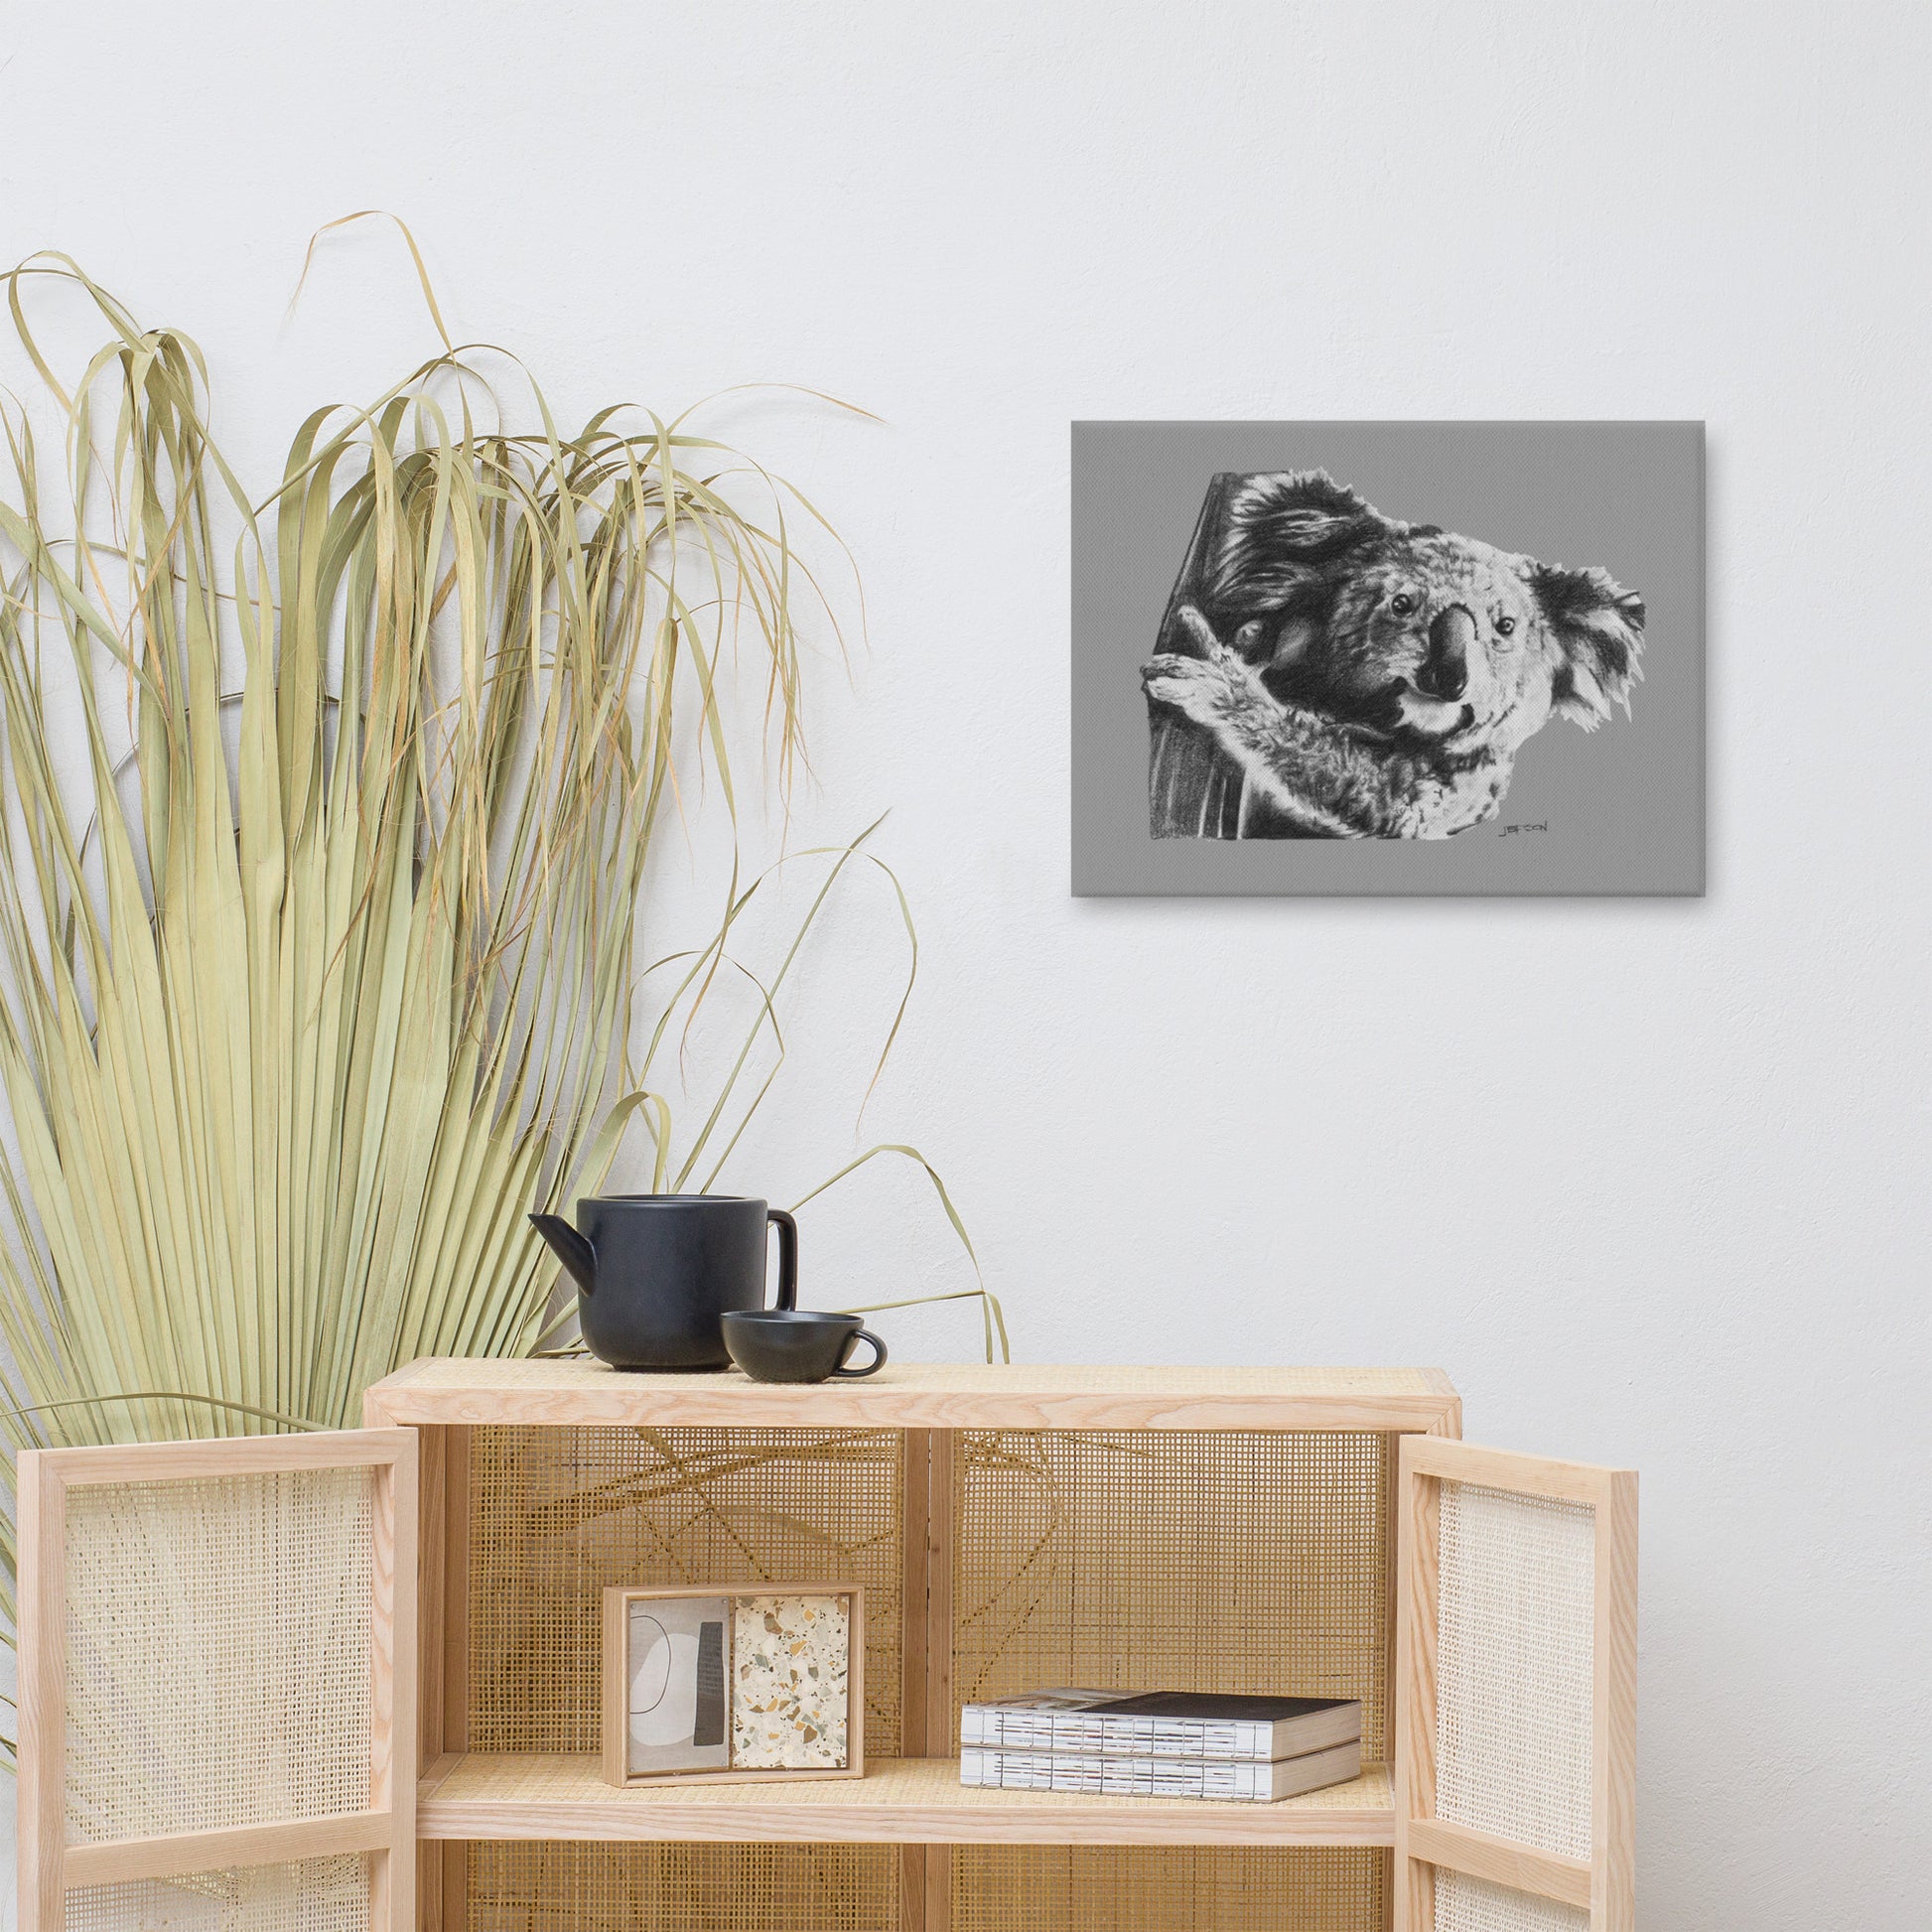 These "Koala Canvas Wall Hangings" are from a drawing of mine created with a graphite penci. It has been digitally optimized and transferred to a poly-cotton blend canvas.